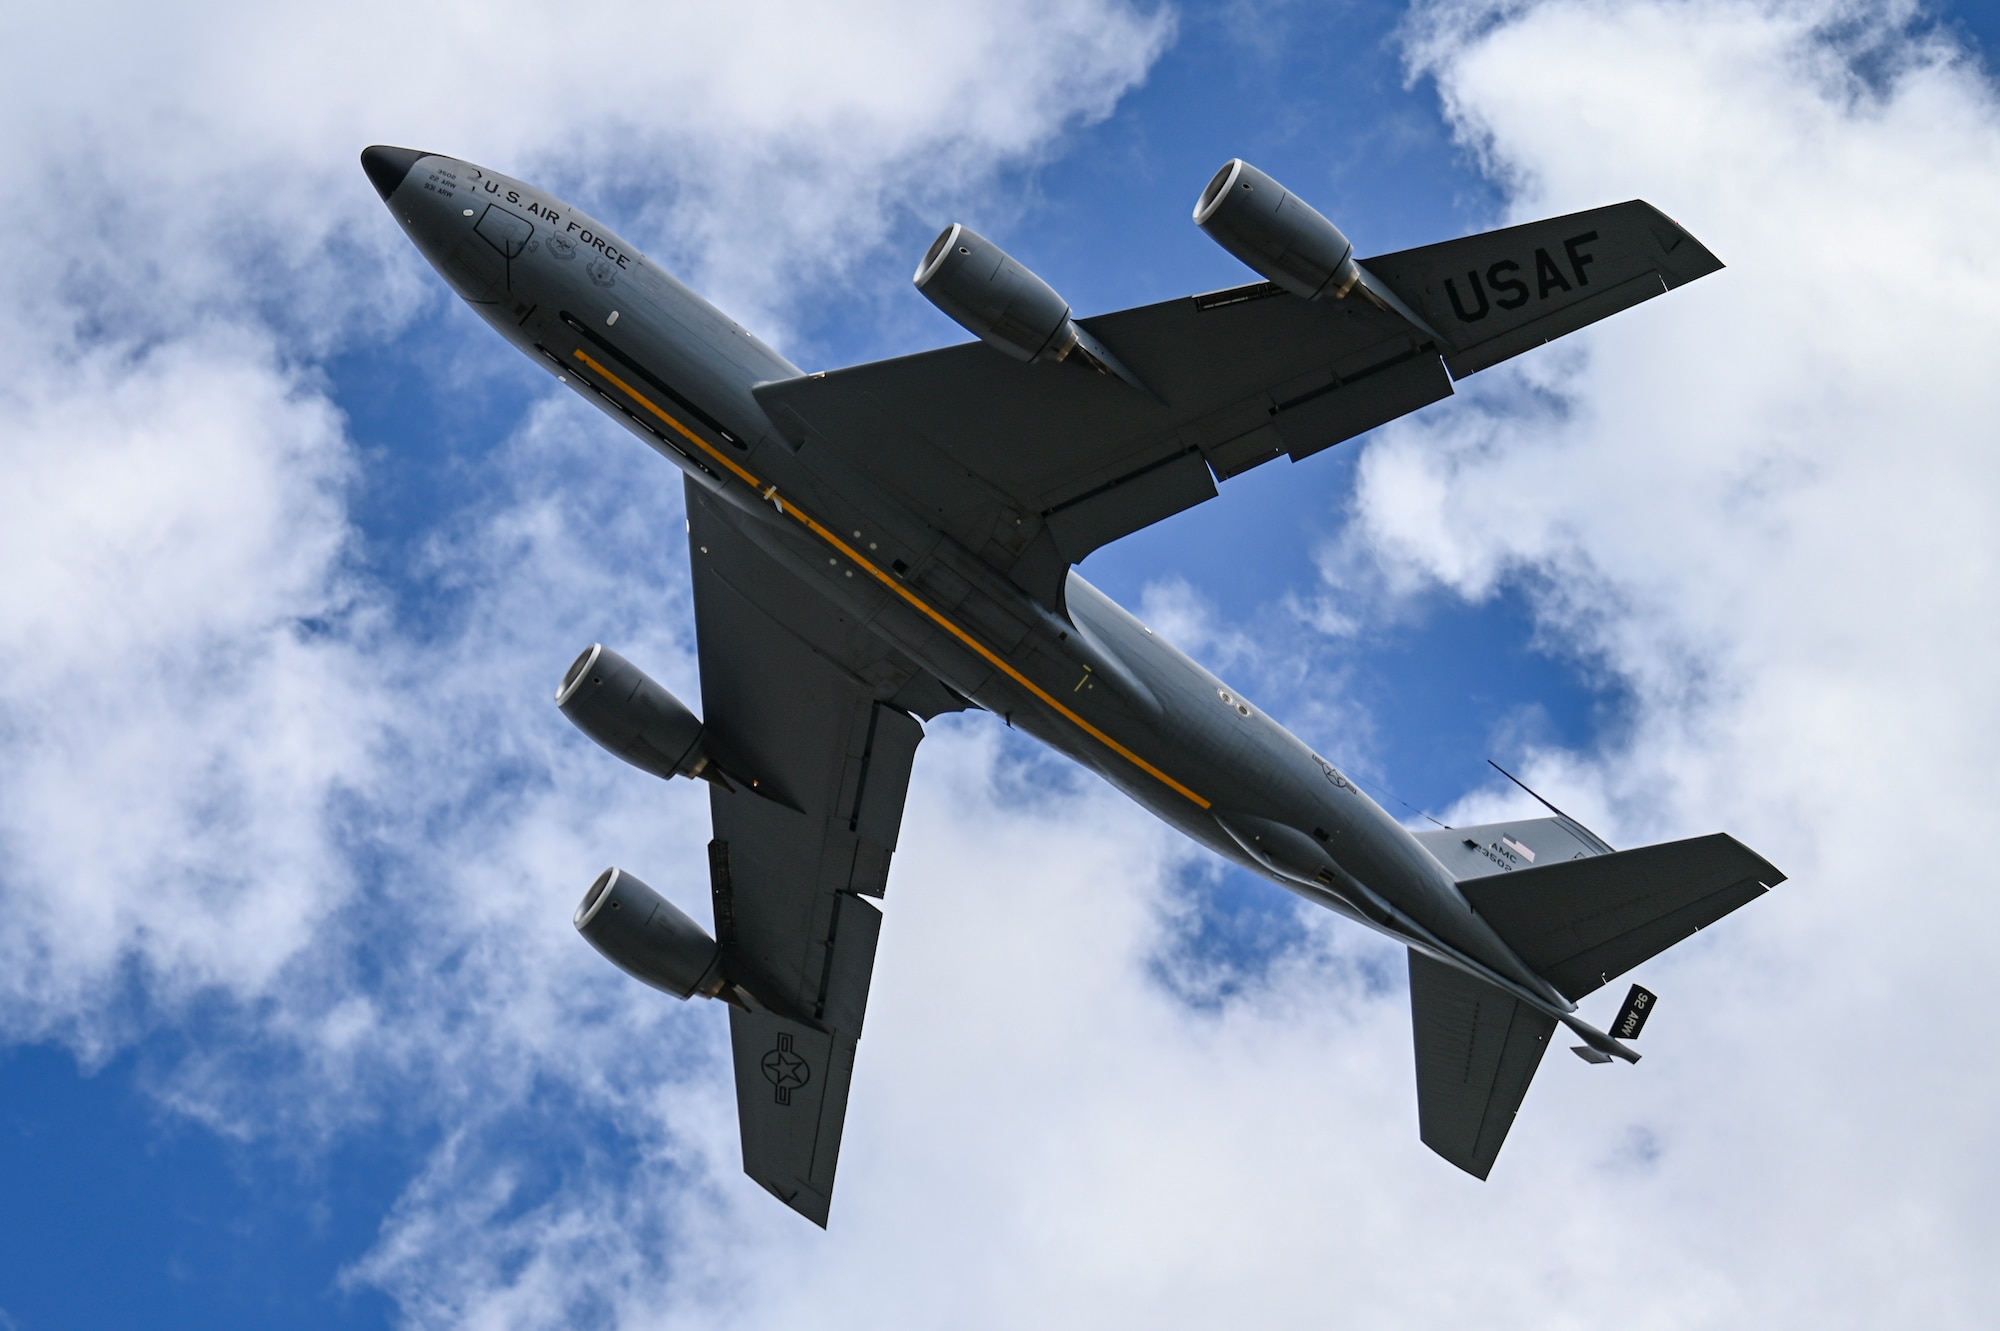 An Air Force plane flying